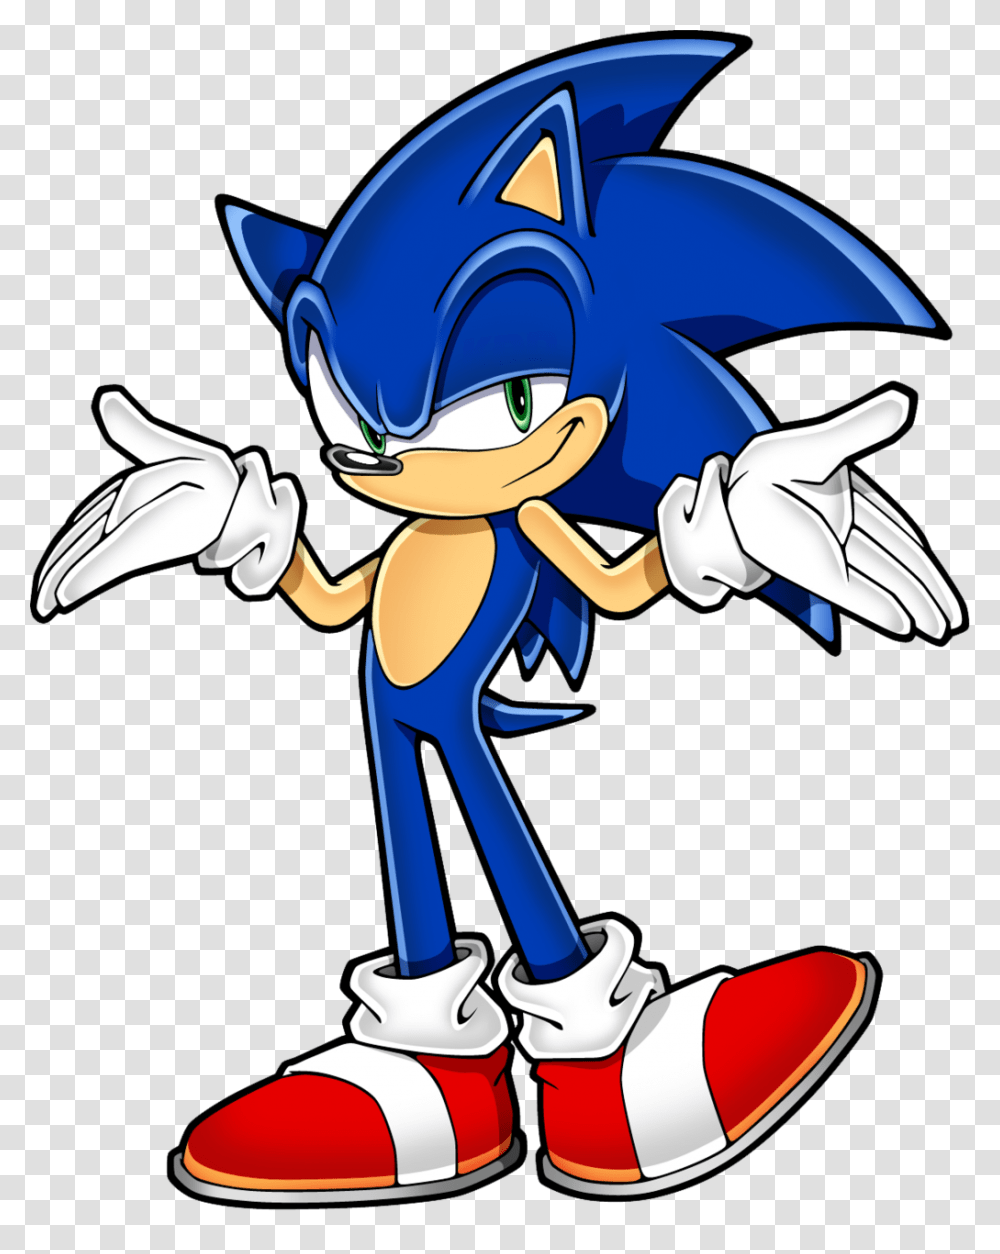 Sonic Shrugging Sonic The Hedgehog Know Your Meme, Figurine, Shoe, Footwear Transparent Png